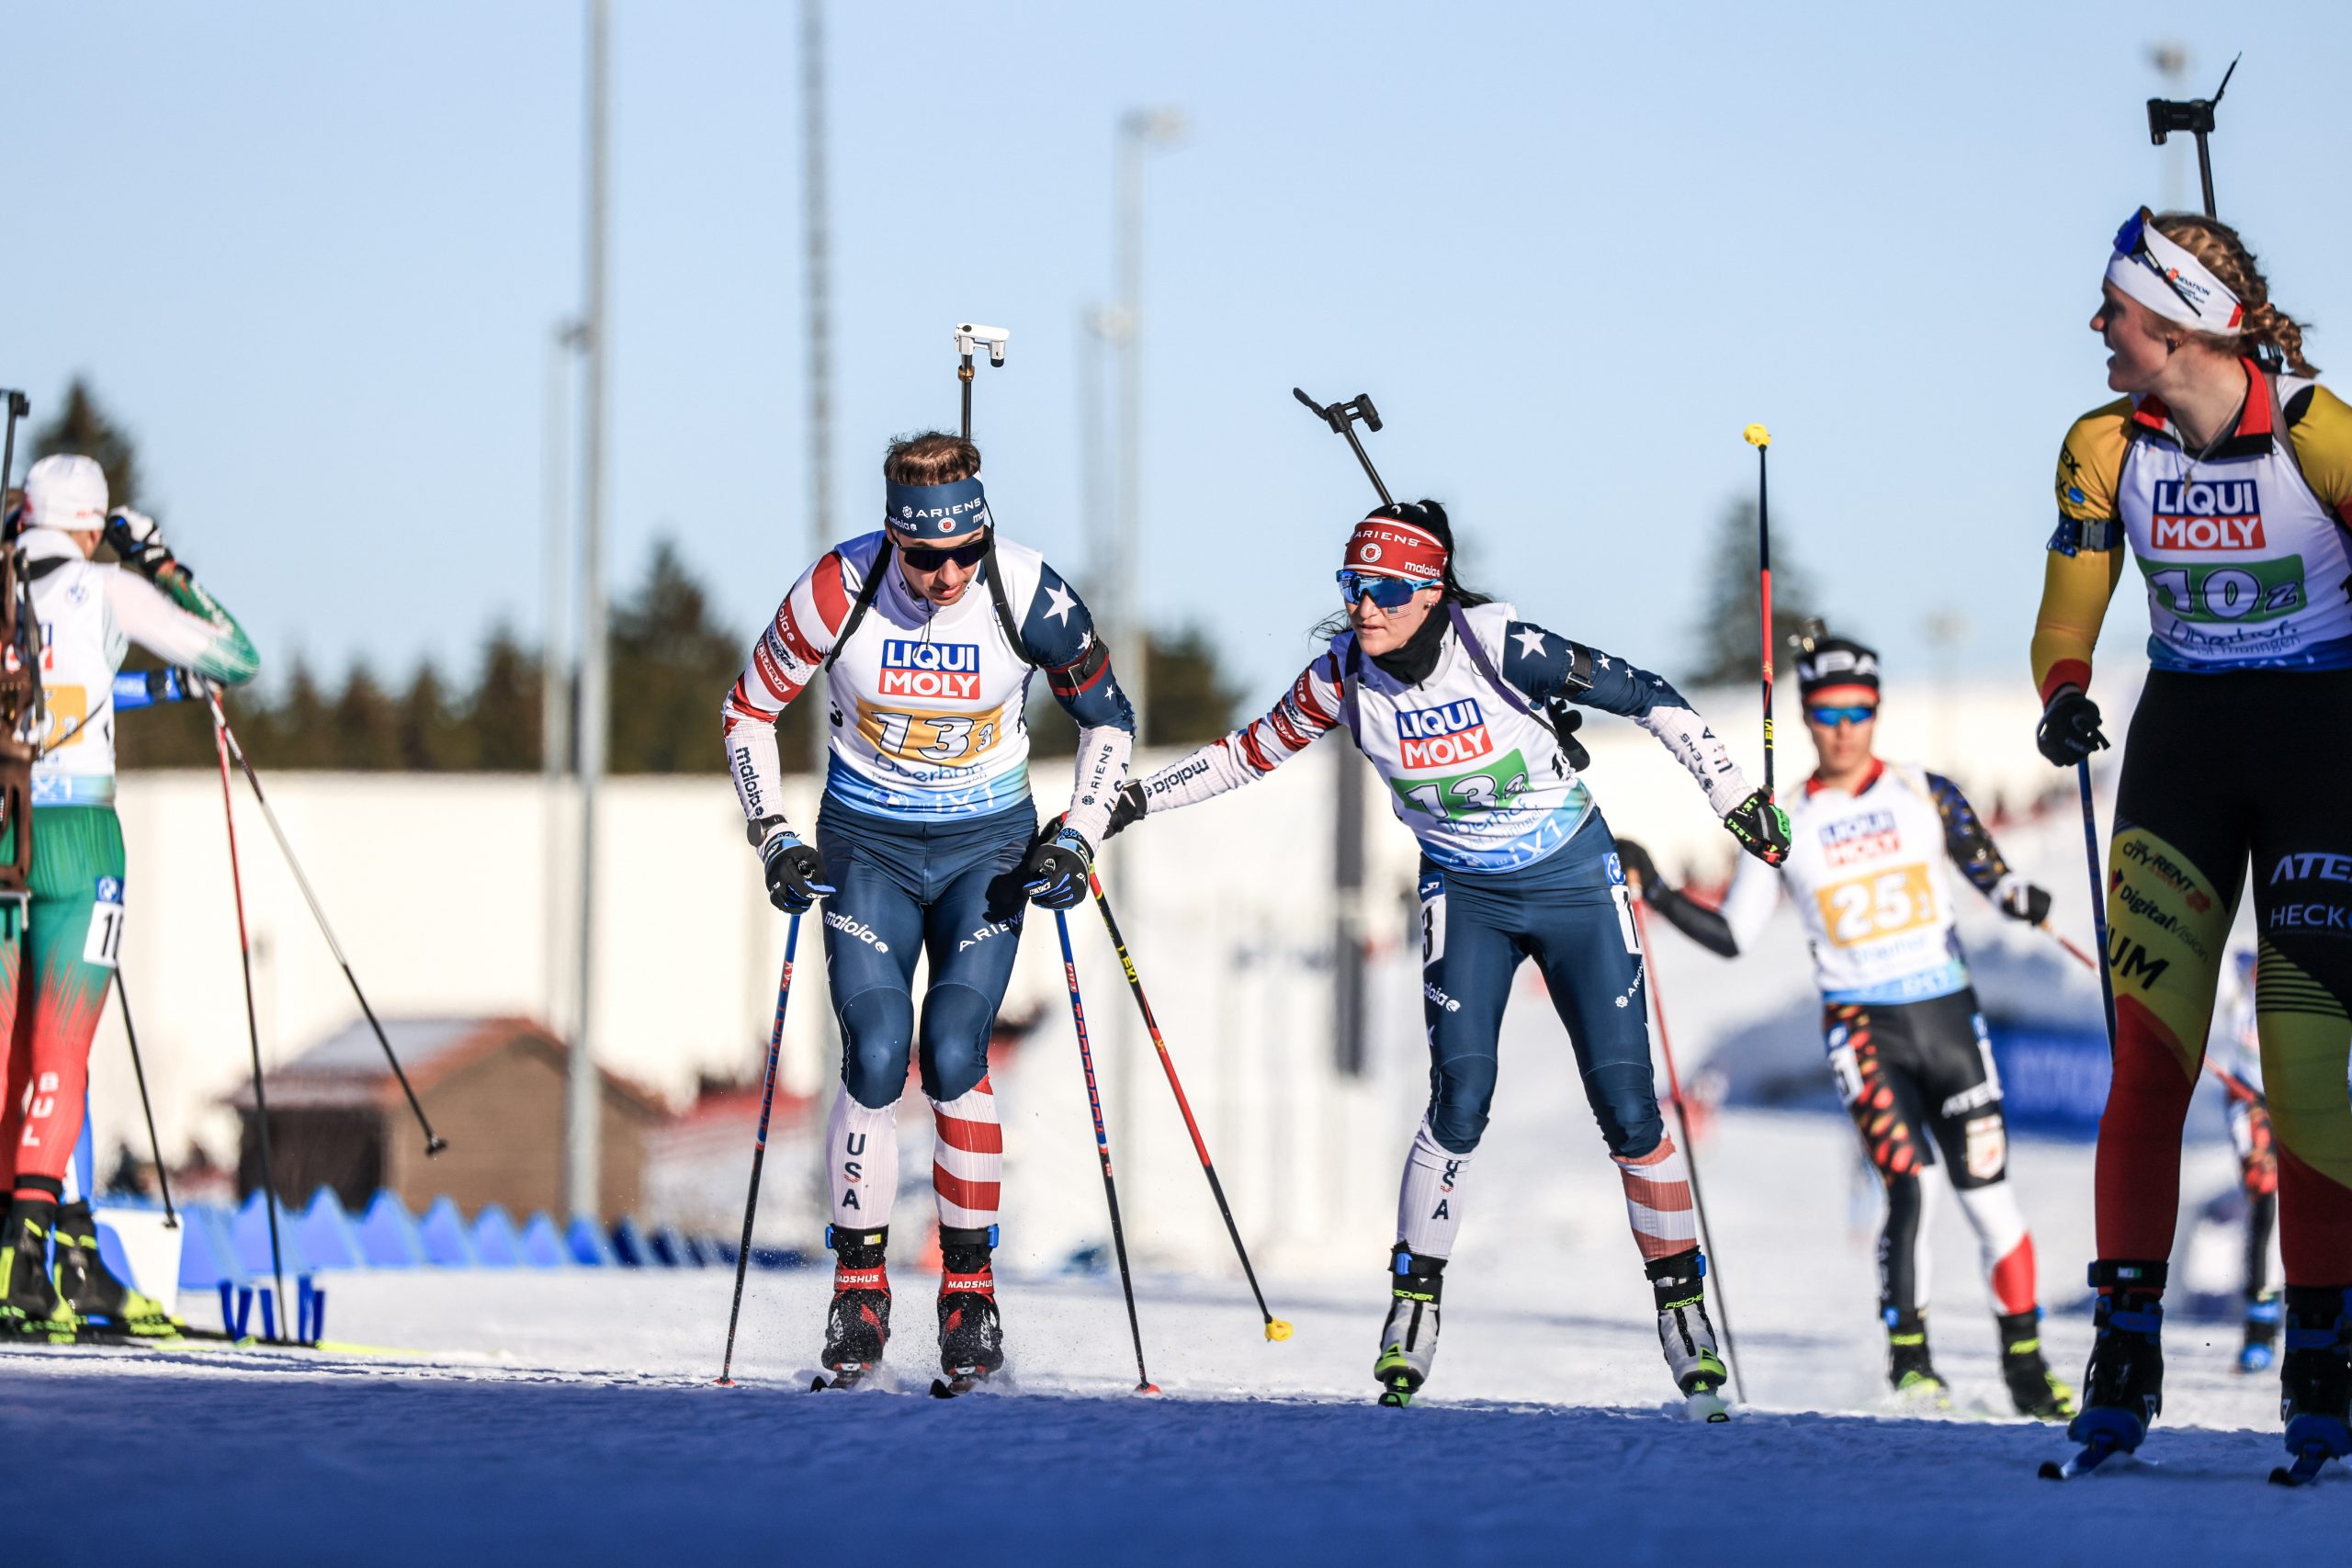 Biathlon World Championships Mixed Relay 26 Nations in the Mix